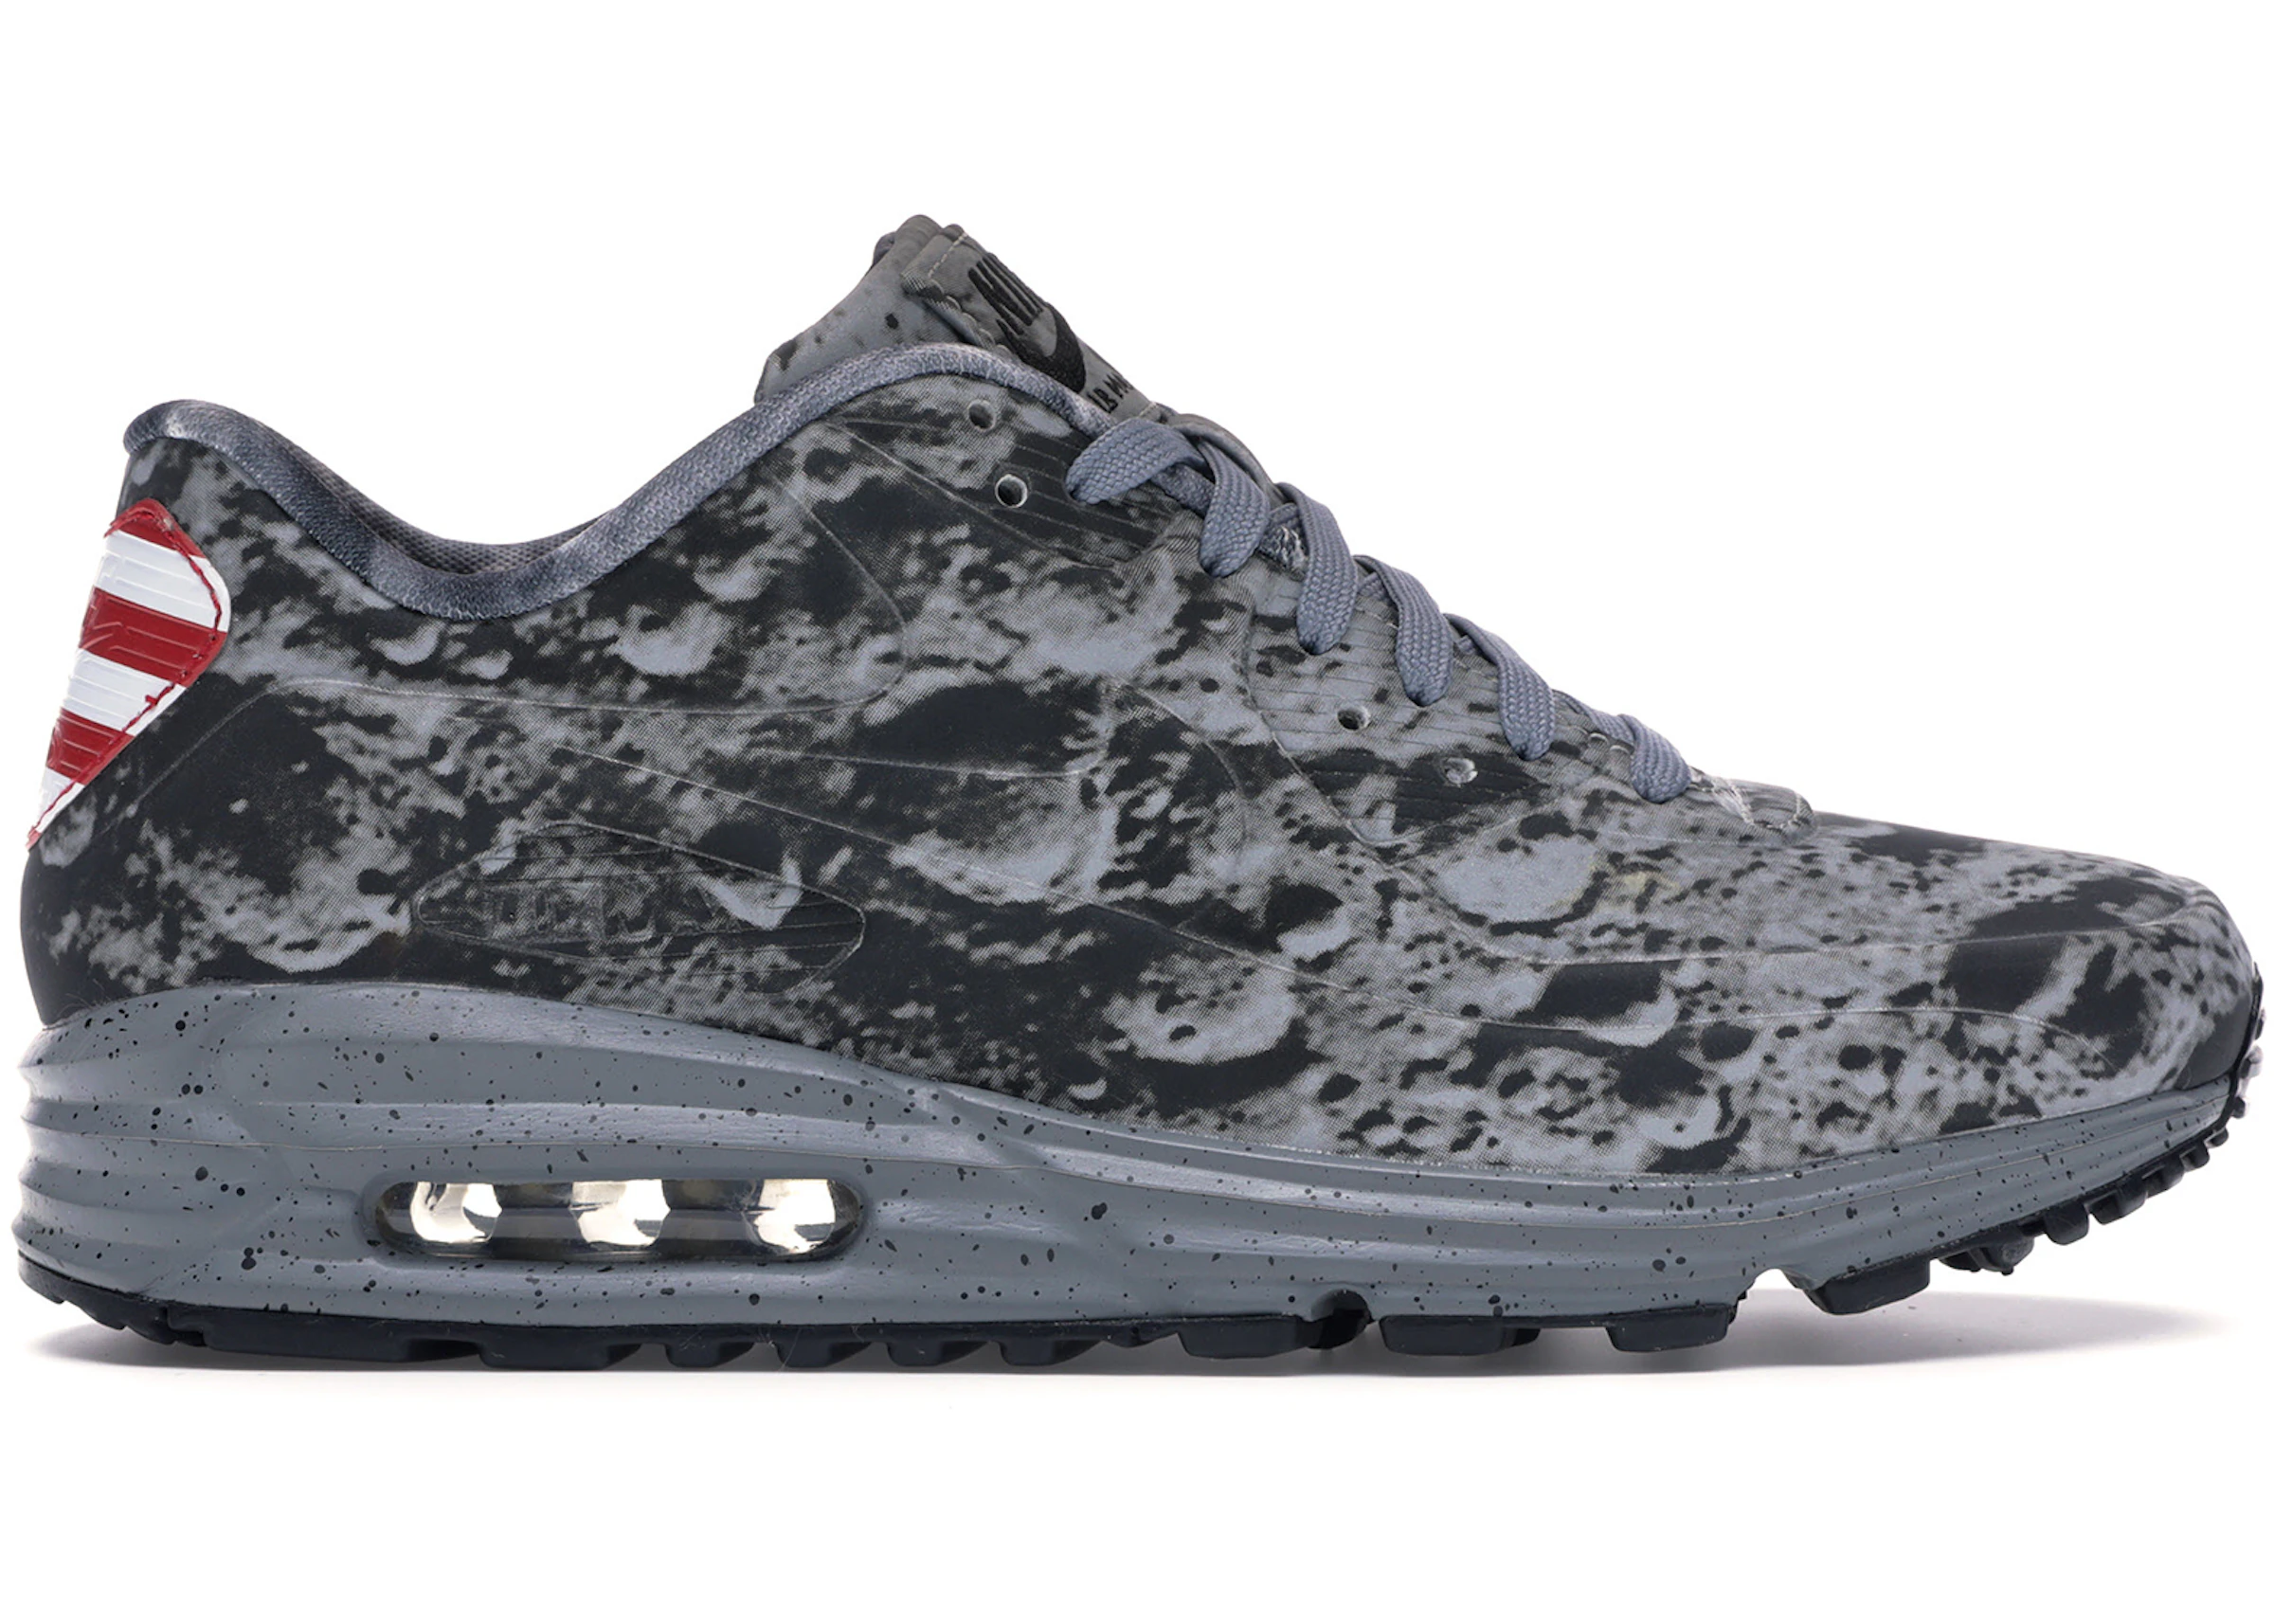 Get tangled collection Chewing gum Nike Air Max Lunar90 SP Moon Landing - 700098-007 - US